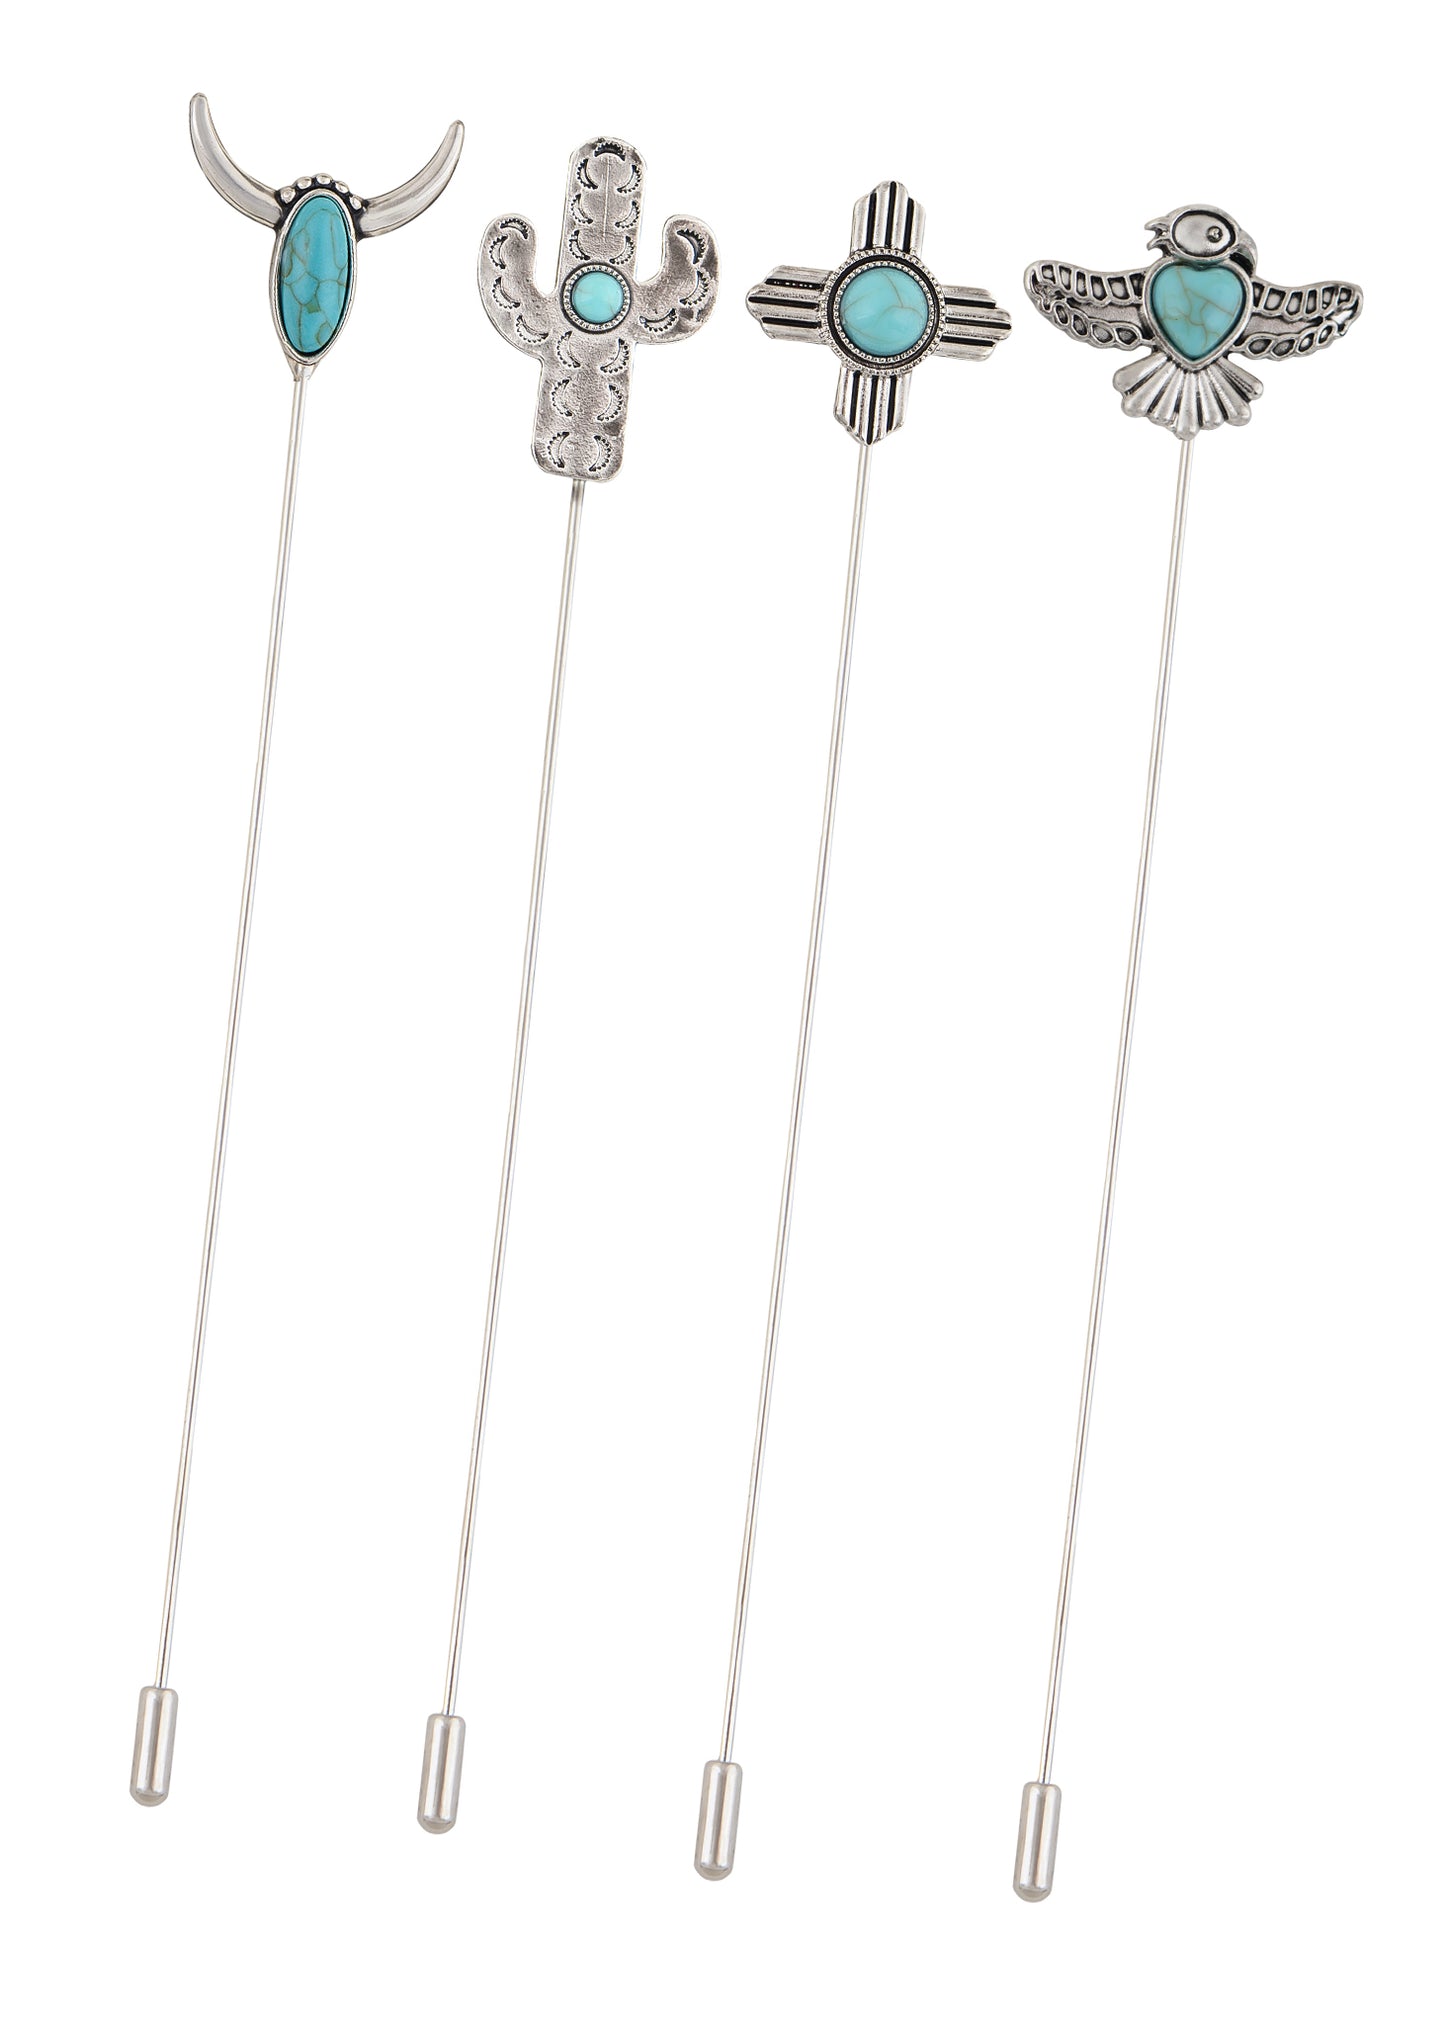 Alilang Women's Vintage Turquoise Cactus Eagle Bird Hatpin Set Jewelry For Hats 5in, Scarves, And Cardigans, Lapel Stick Pack Of 1/3